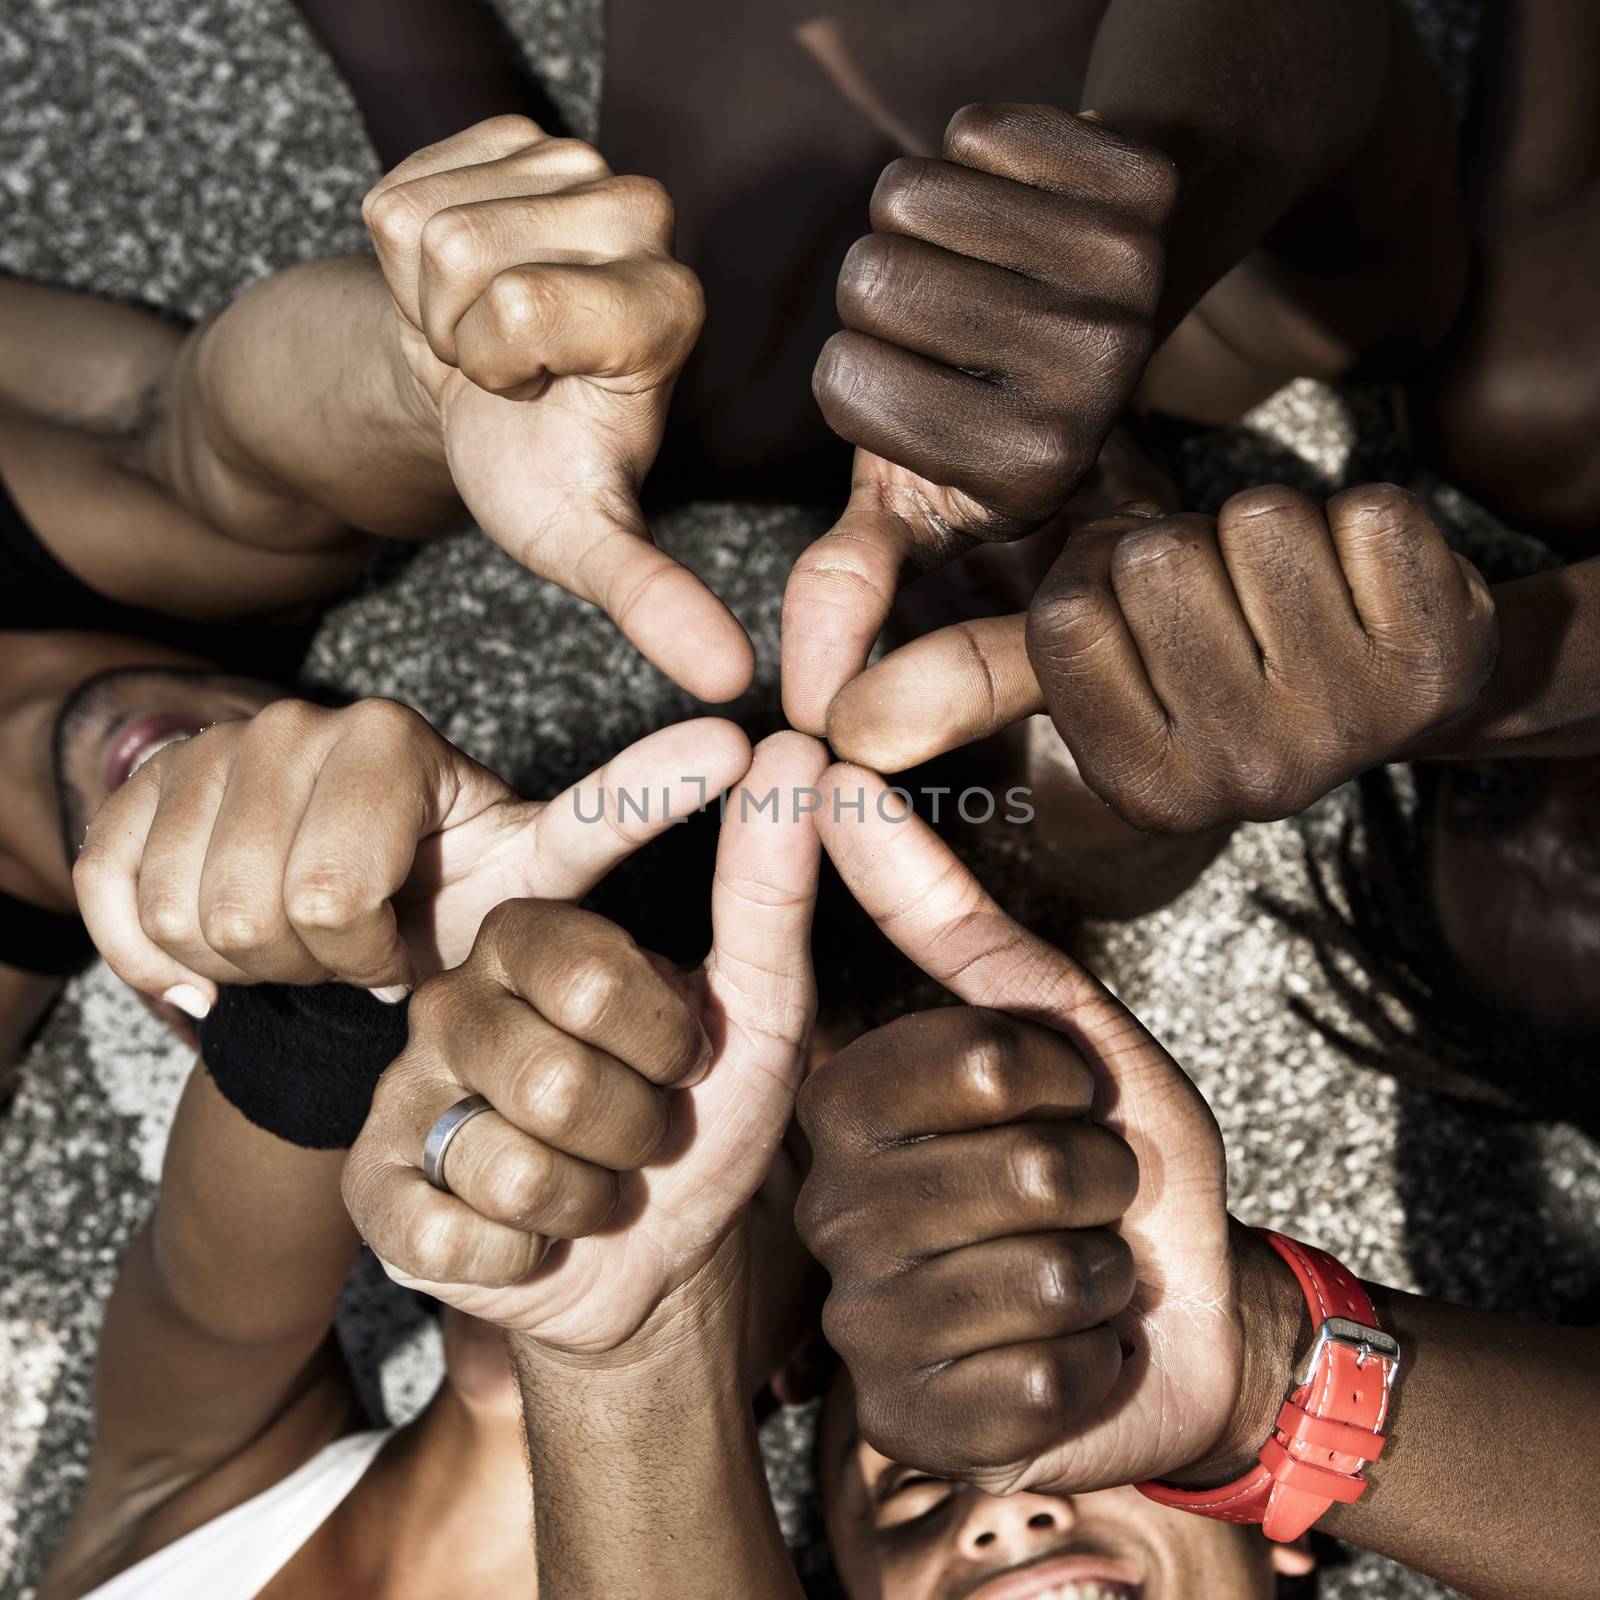 A group of mixed race people with hands doing thumbs up